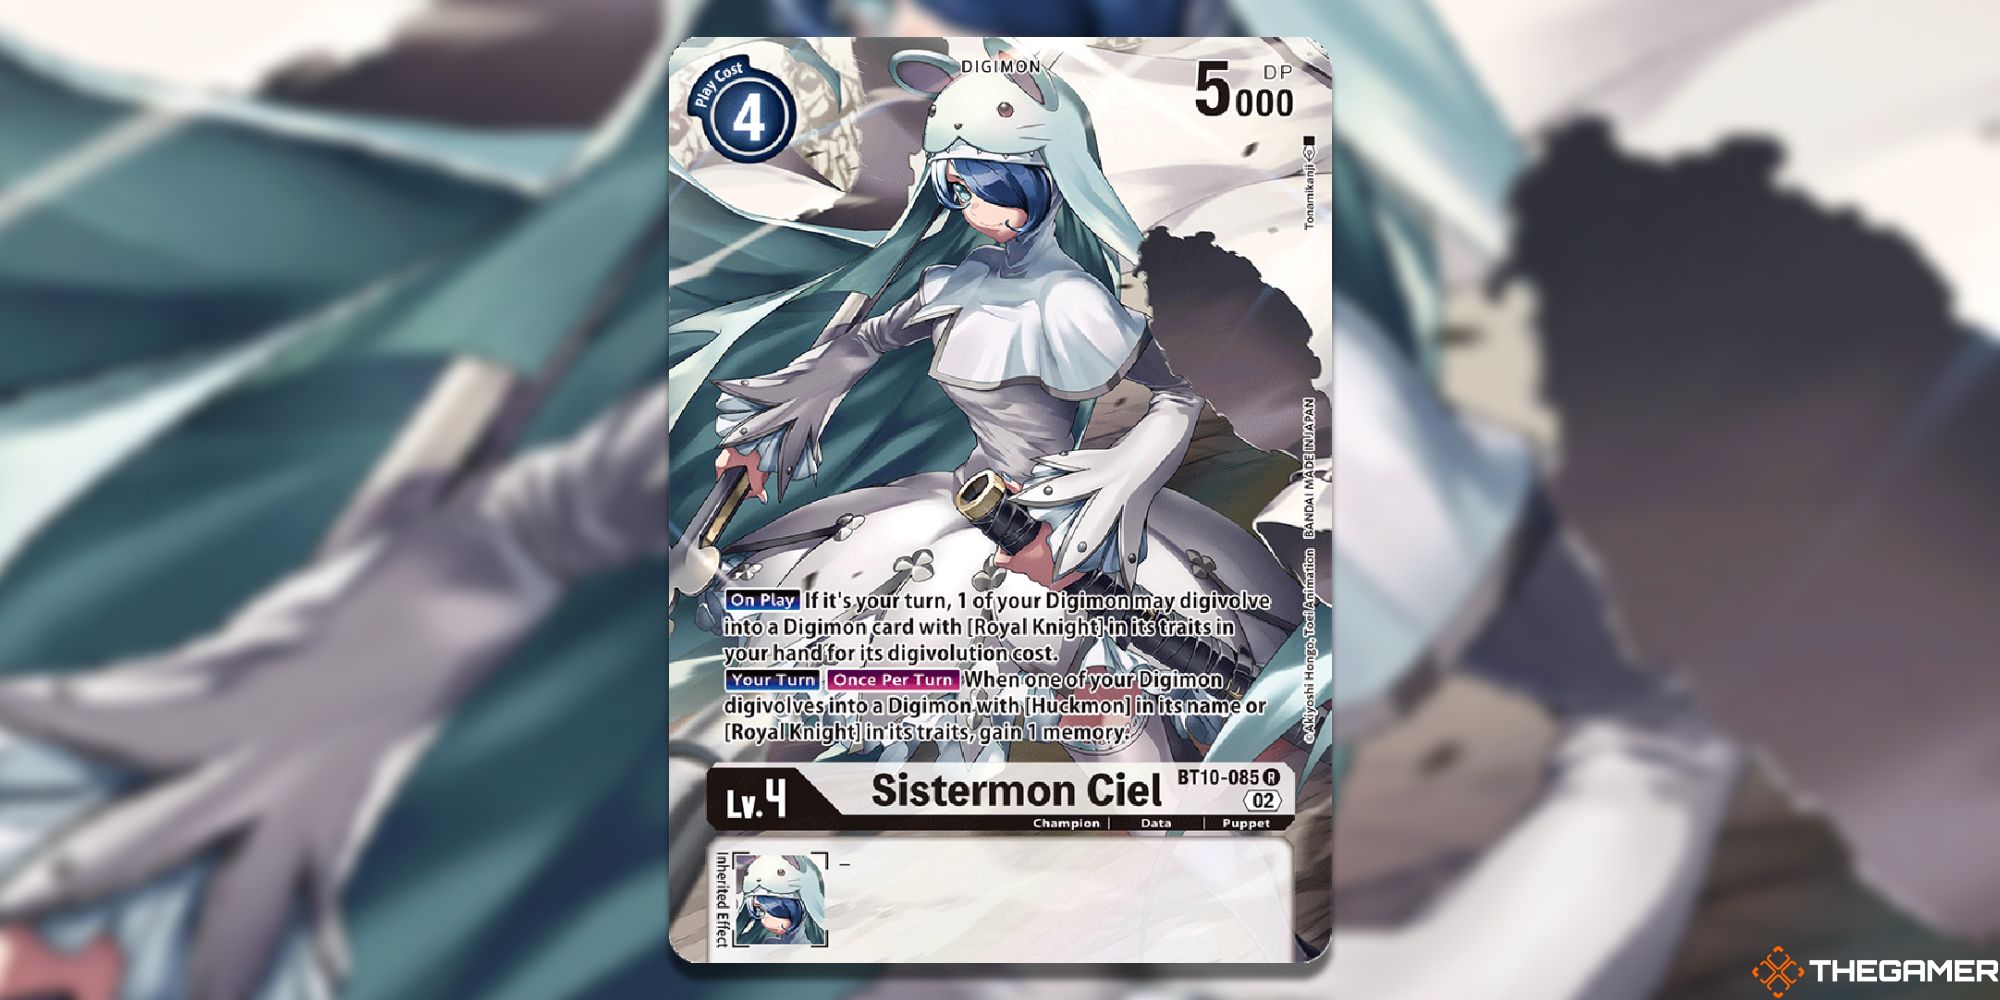 sistermon ciel bt10 card from digimon card game with blur background